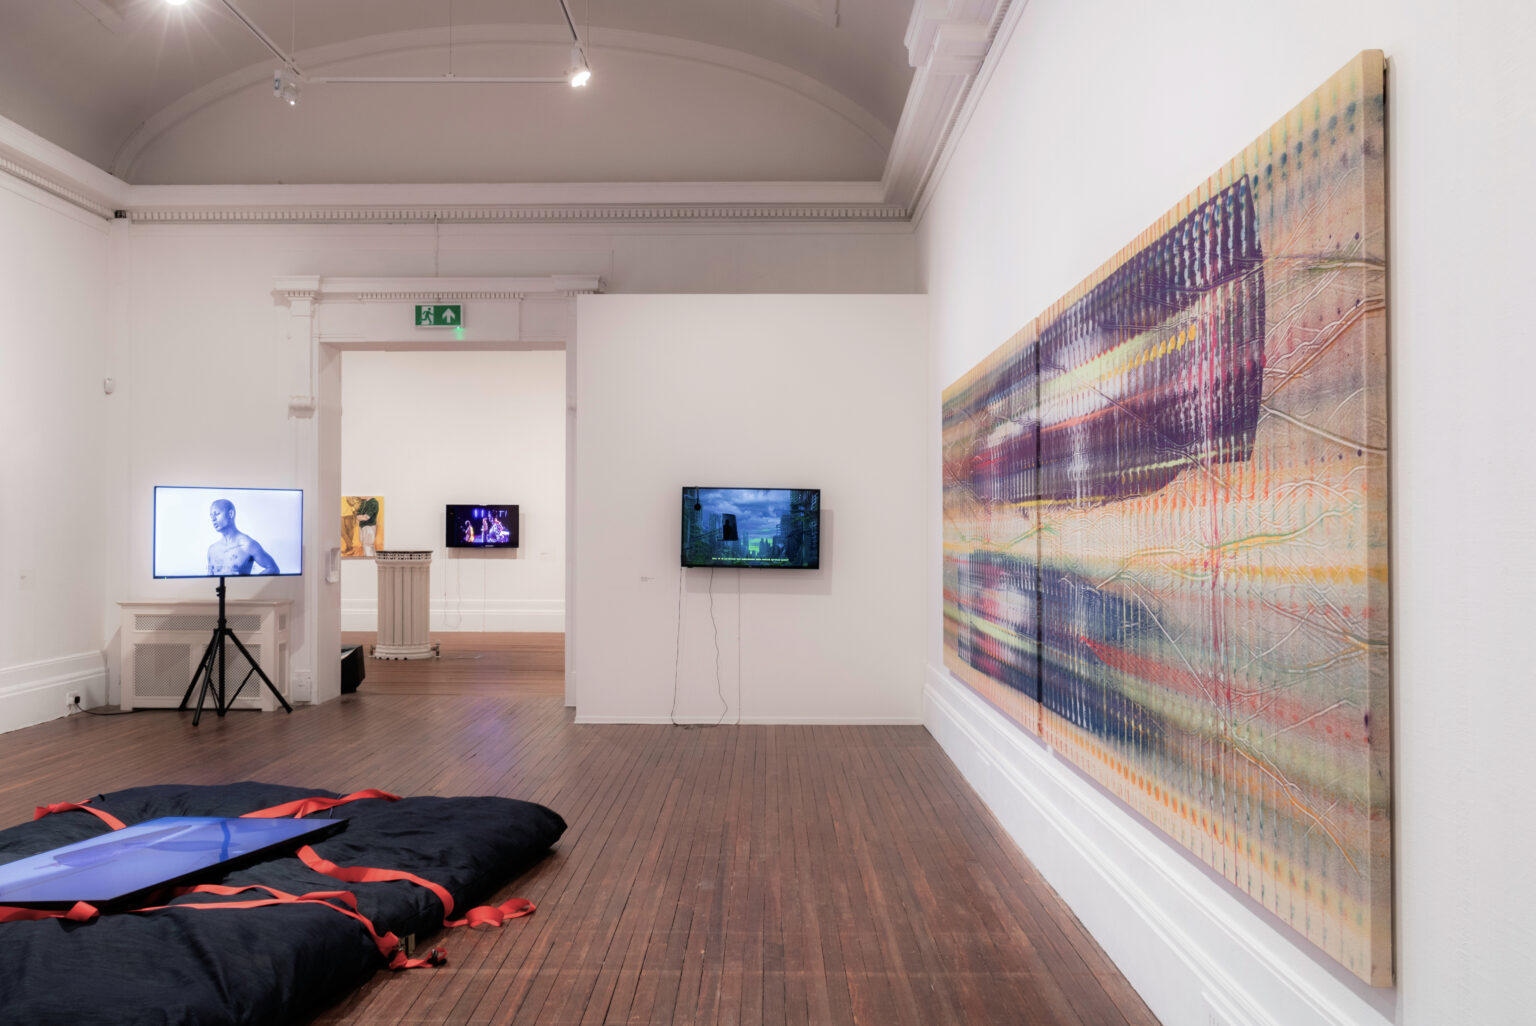 The gallery has white walls and brown wooden floors. A large multicoloured canvas to the right with small monitors against the far back wall and a large black cushion on the floor in the middle of the space.